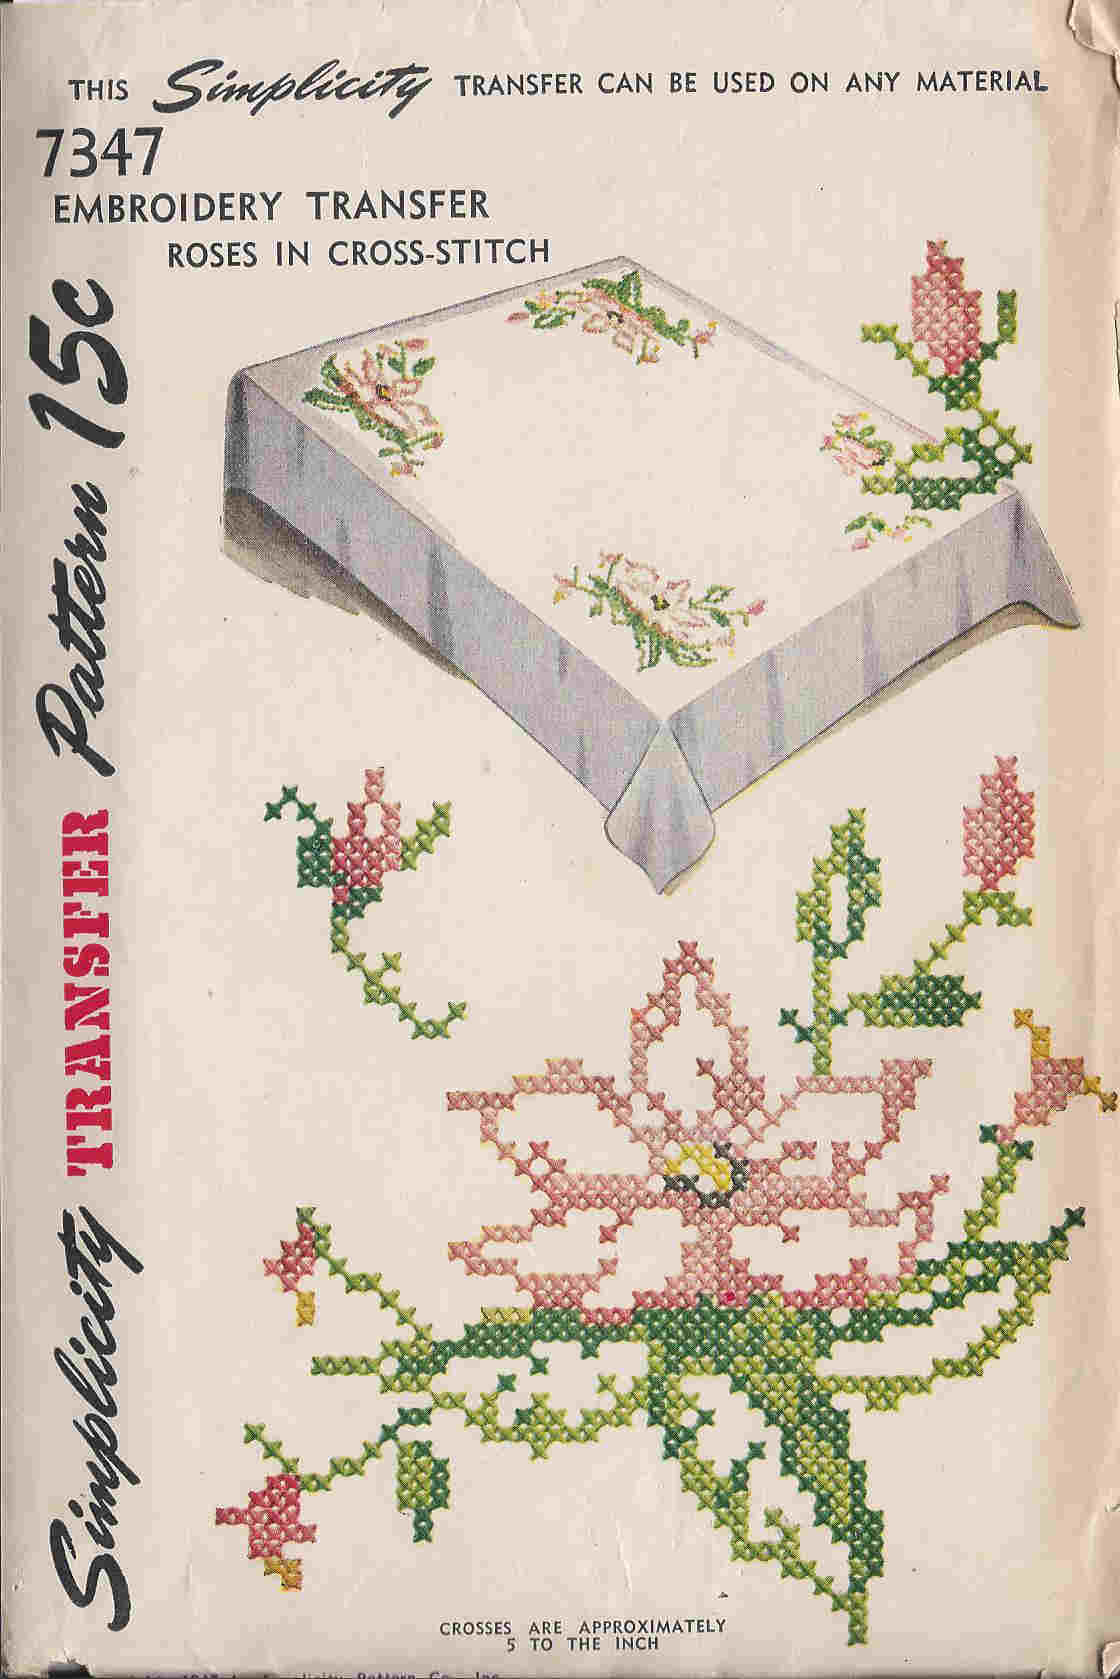 Embroidery Transfer Patterns Dellajane Sewing Patterns Aunt Martha Transfer And Embroidery Patterns